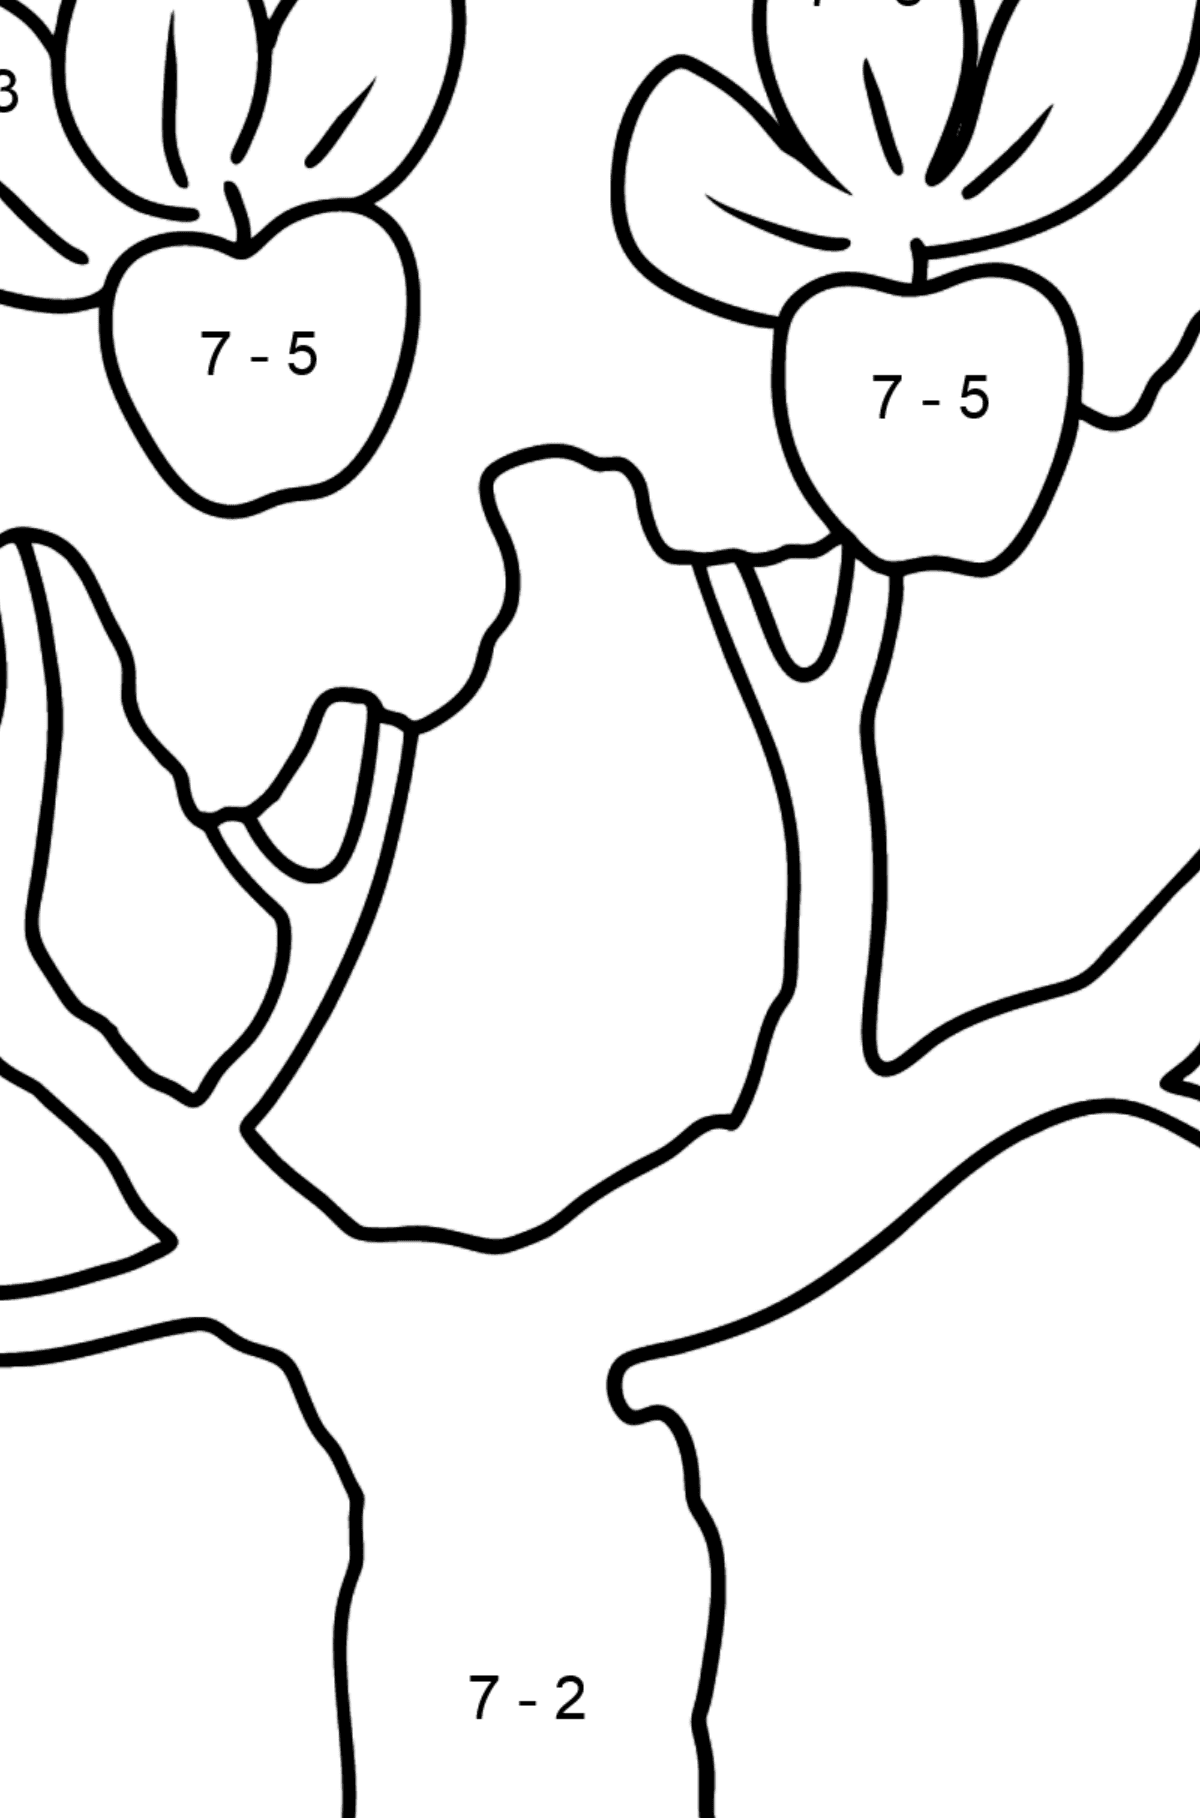 Apple Tree coloring page - Math Coloring - Subtraction for Kids